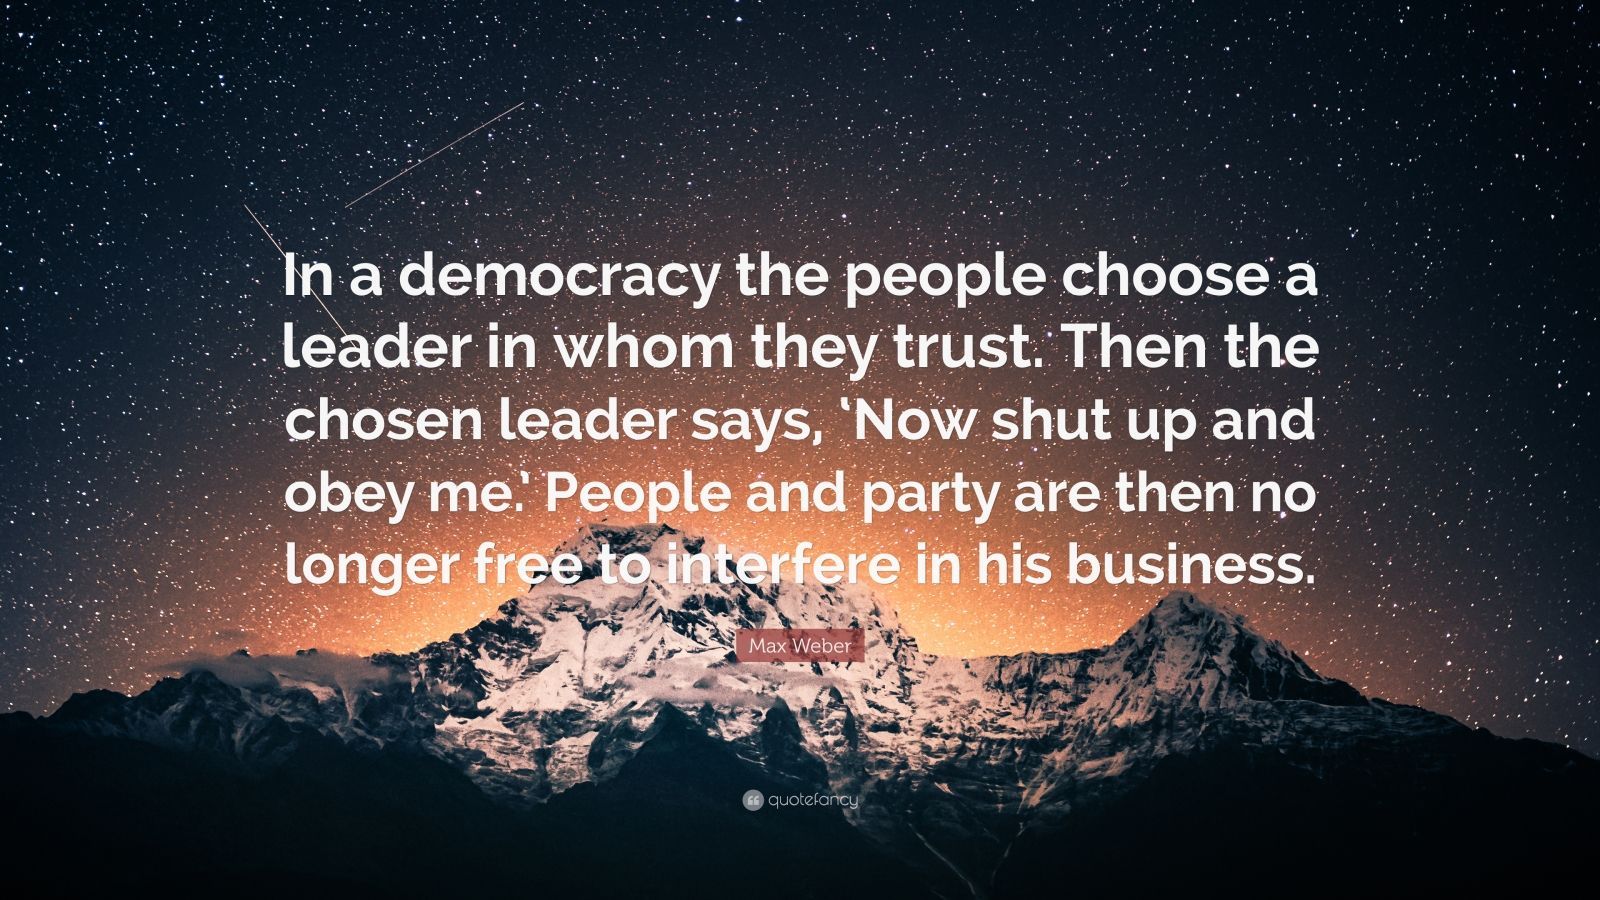 Max Weber Quote: “In a democracy the people choose a leader